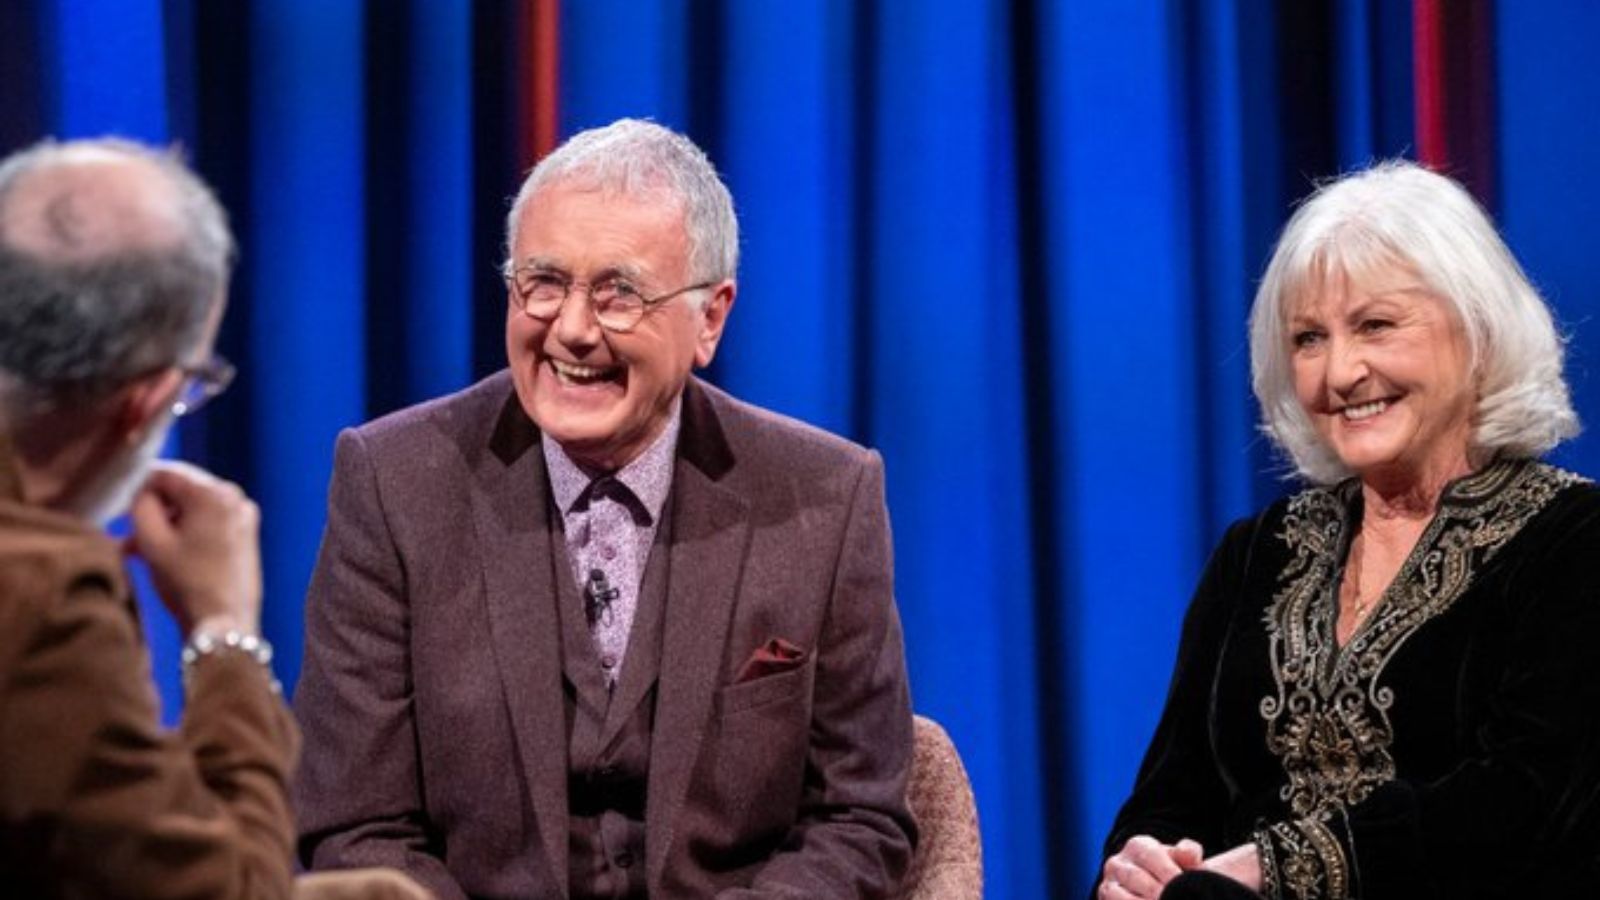 Bryan Murray and Una Crawford-O'Brien on the Tommy Tiernan Show